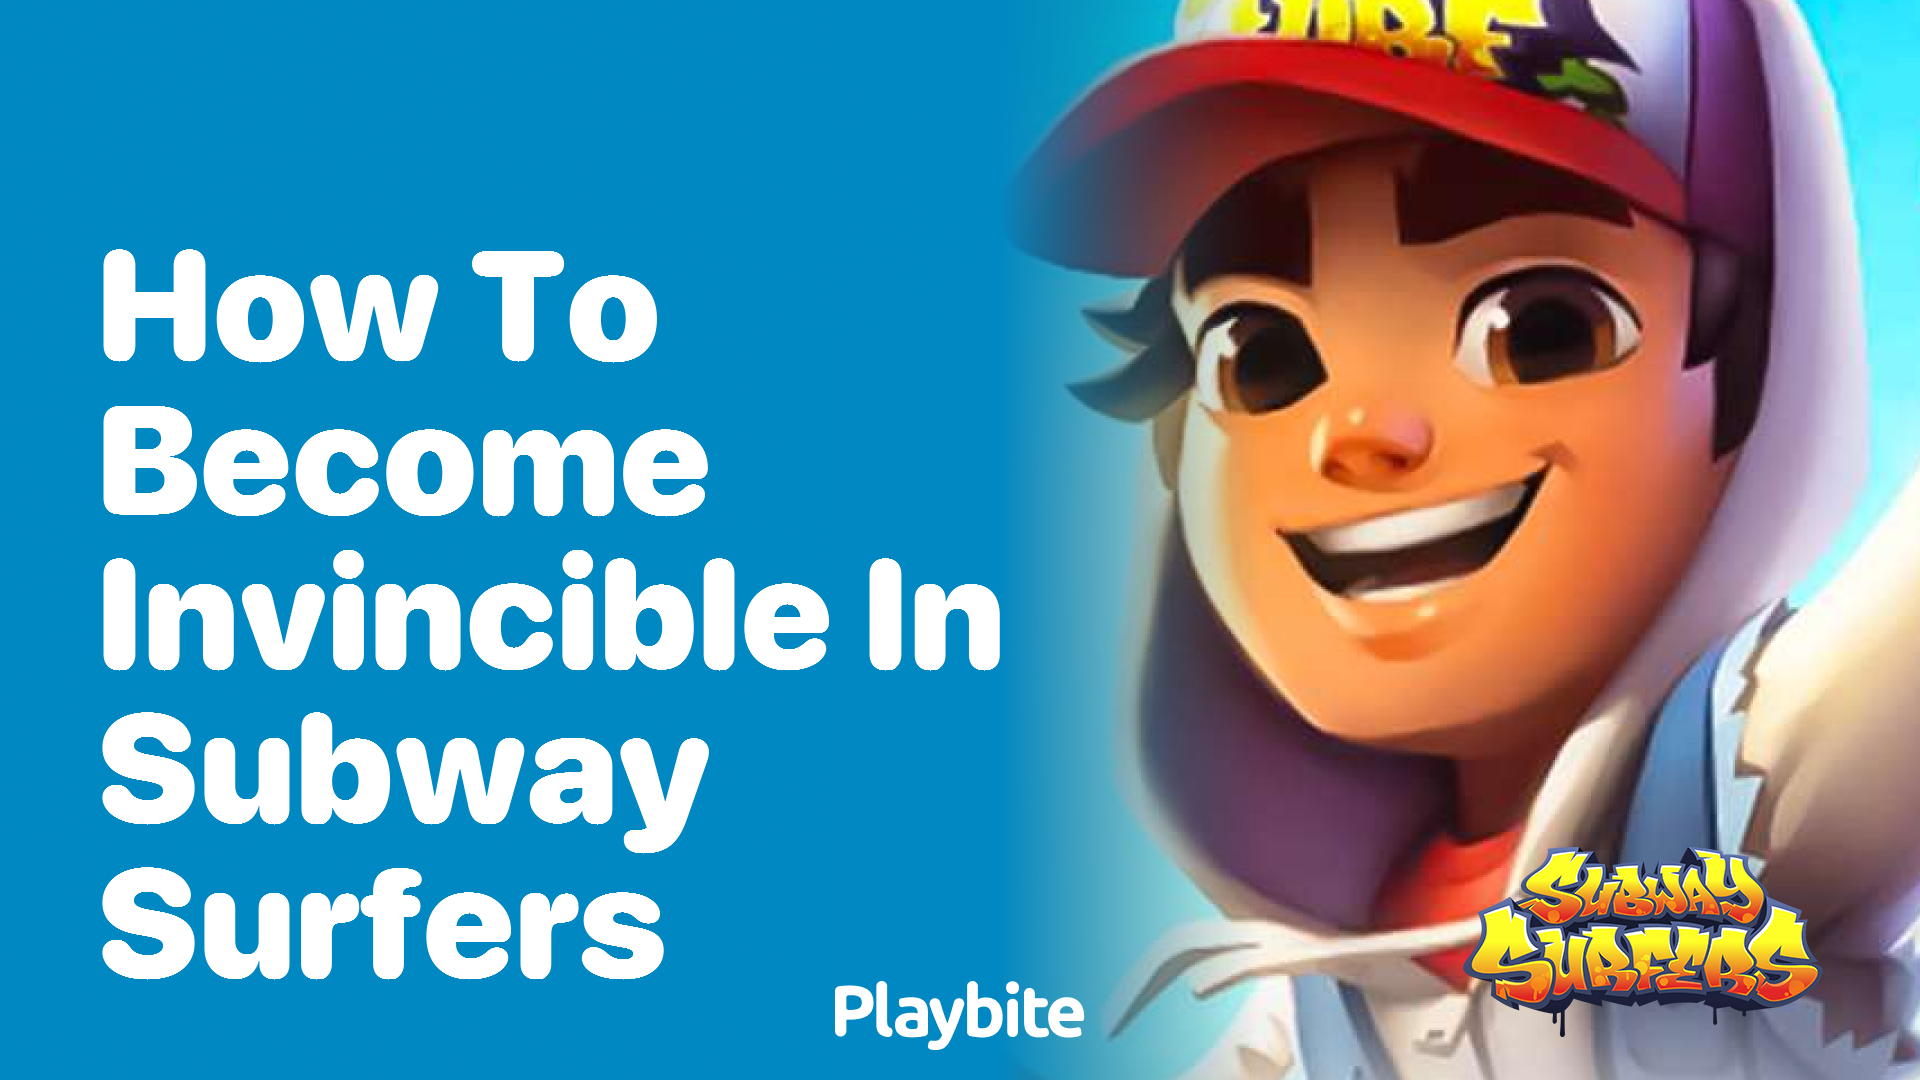 How to become invincible in Subway Surfers